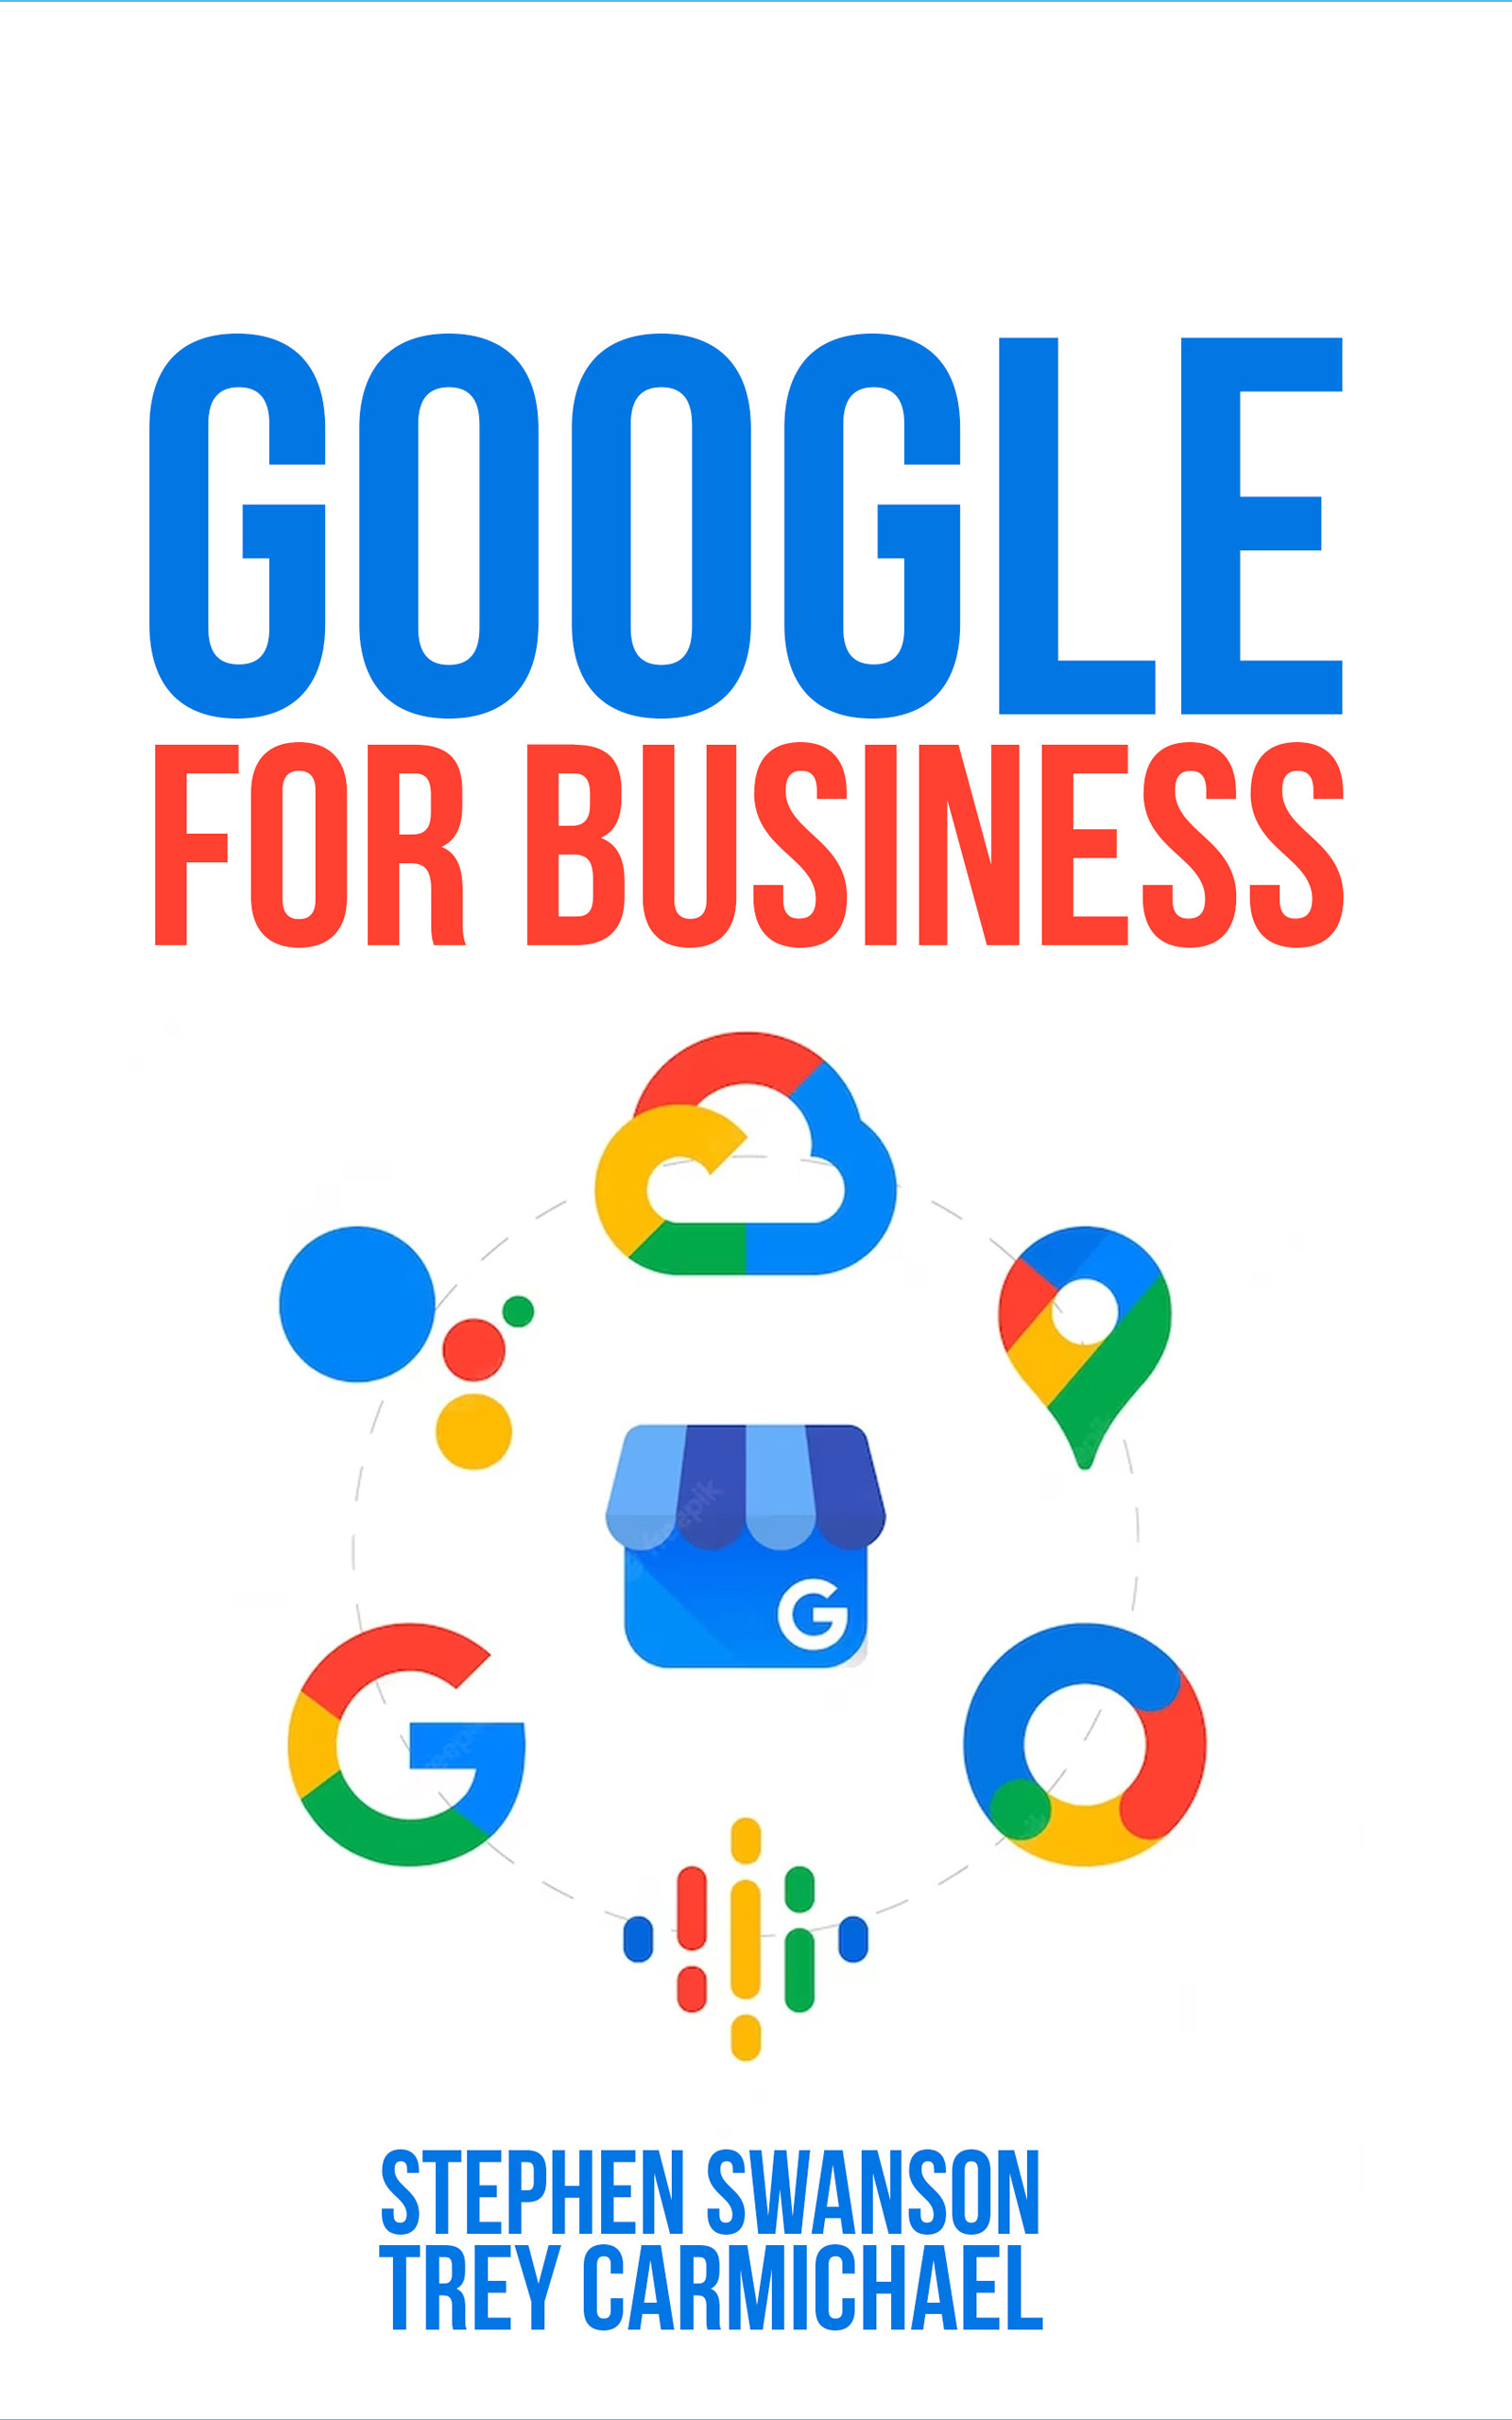 Trey Carmichael and Stephen Swanson Release Comprehensive Guide on Google Tools for Business Growth